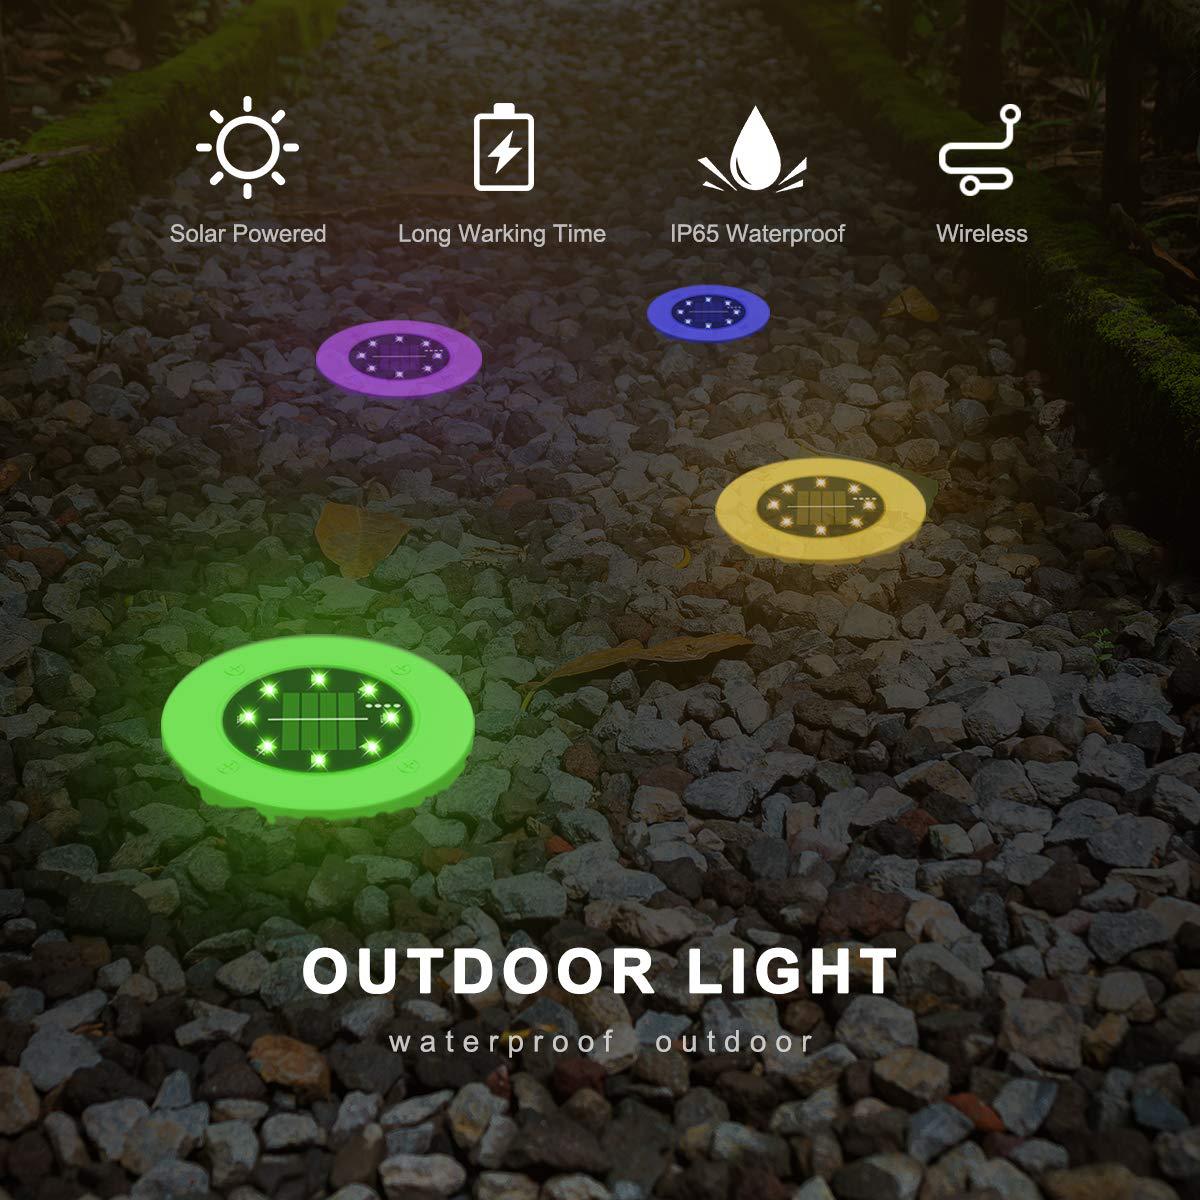 Colorful-Conversion-LED-Lawn-Lights-RGB-Solar-Stainless-Steel-8LED-Underground-Light-Garden-Lawn-Dec-1816608-5